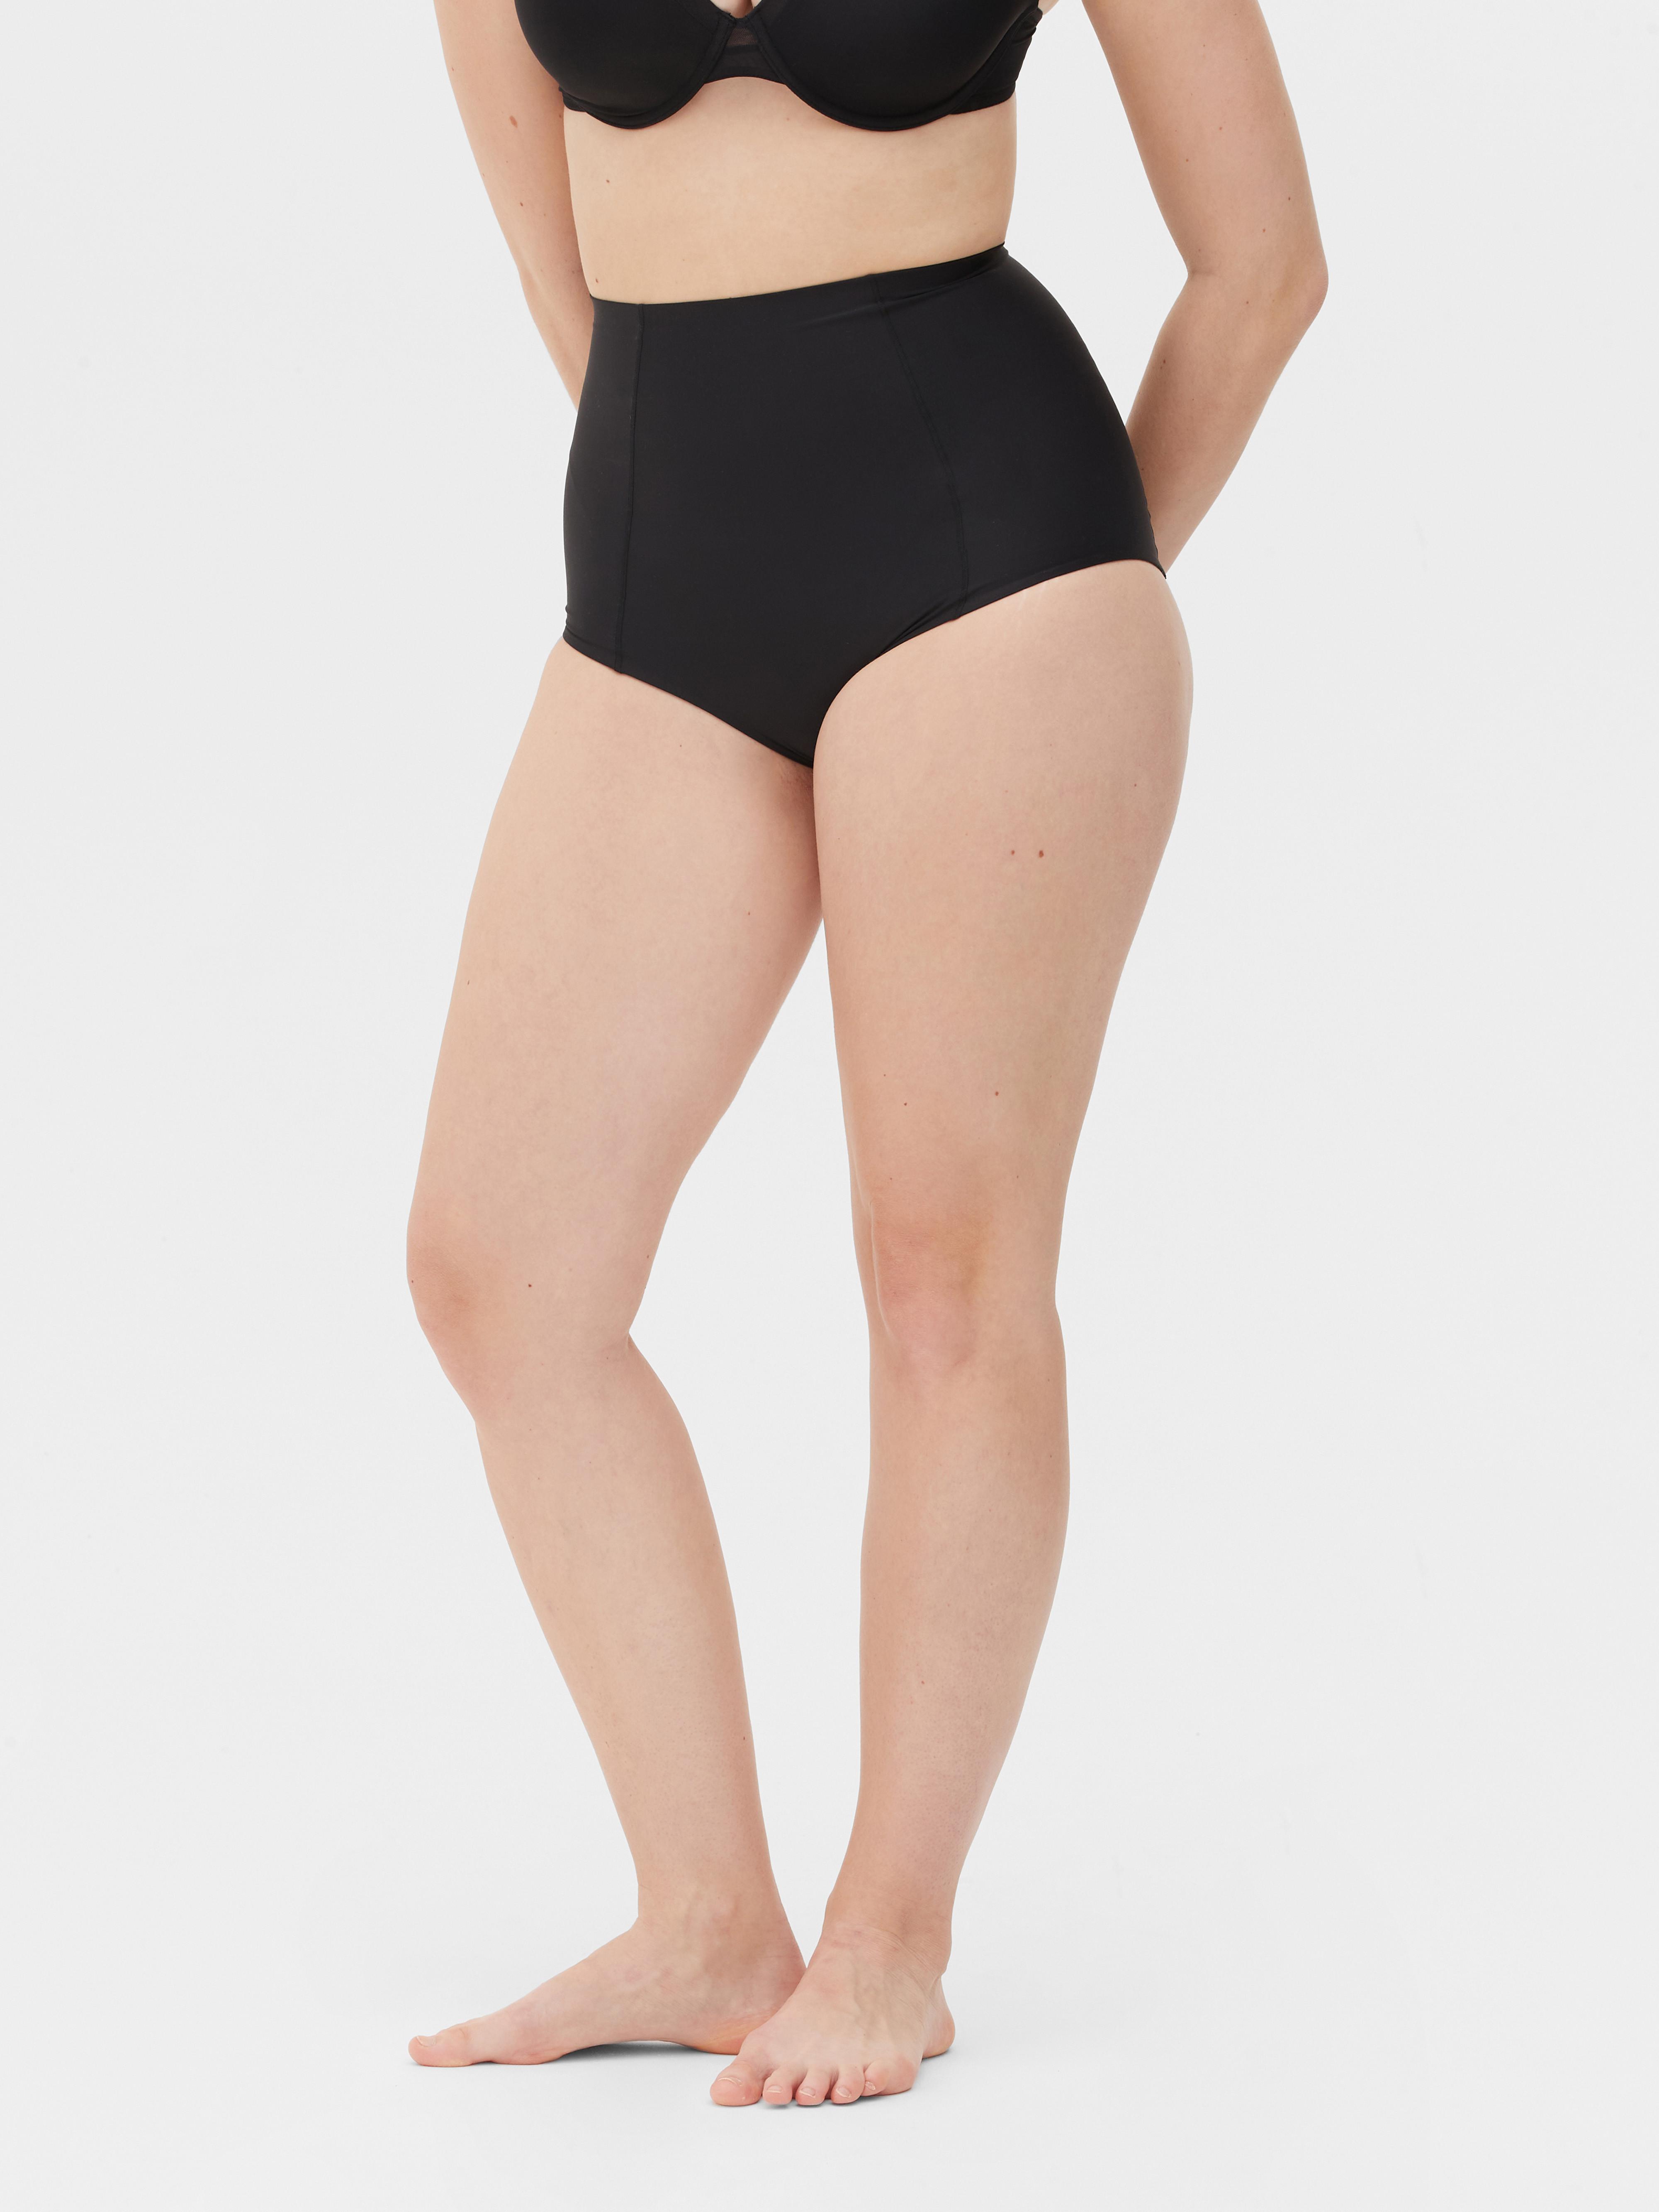 Luckywaqng Primark Shop Online New Large Seamless Comfortable